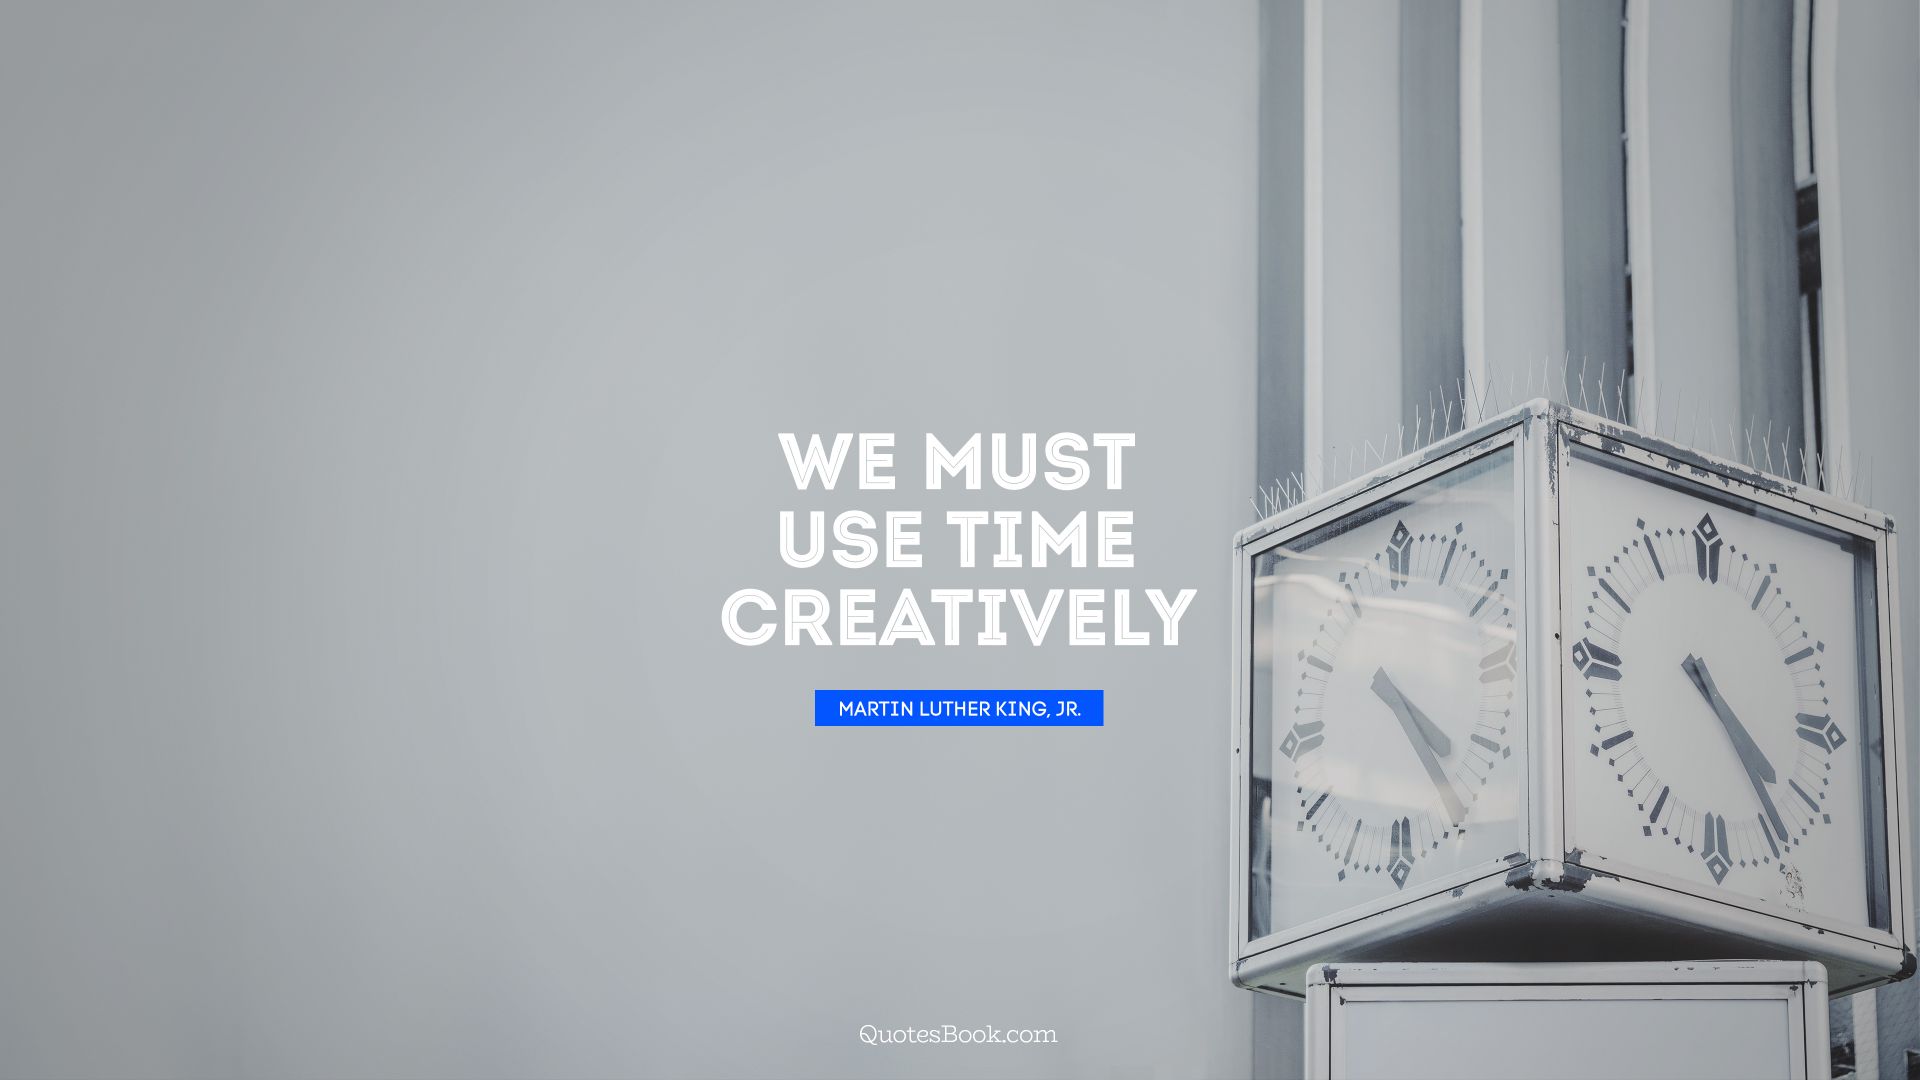 We must use time creatively. - Quote by Martin Luther King, Jr.